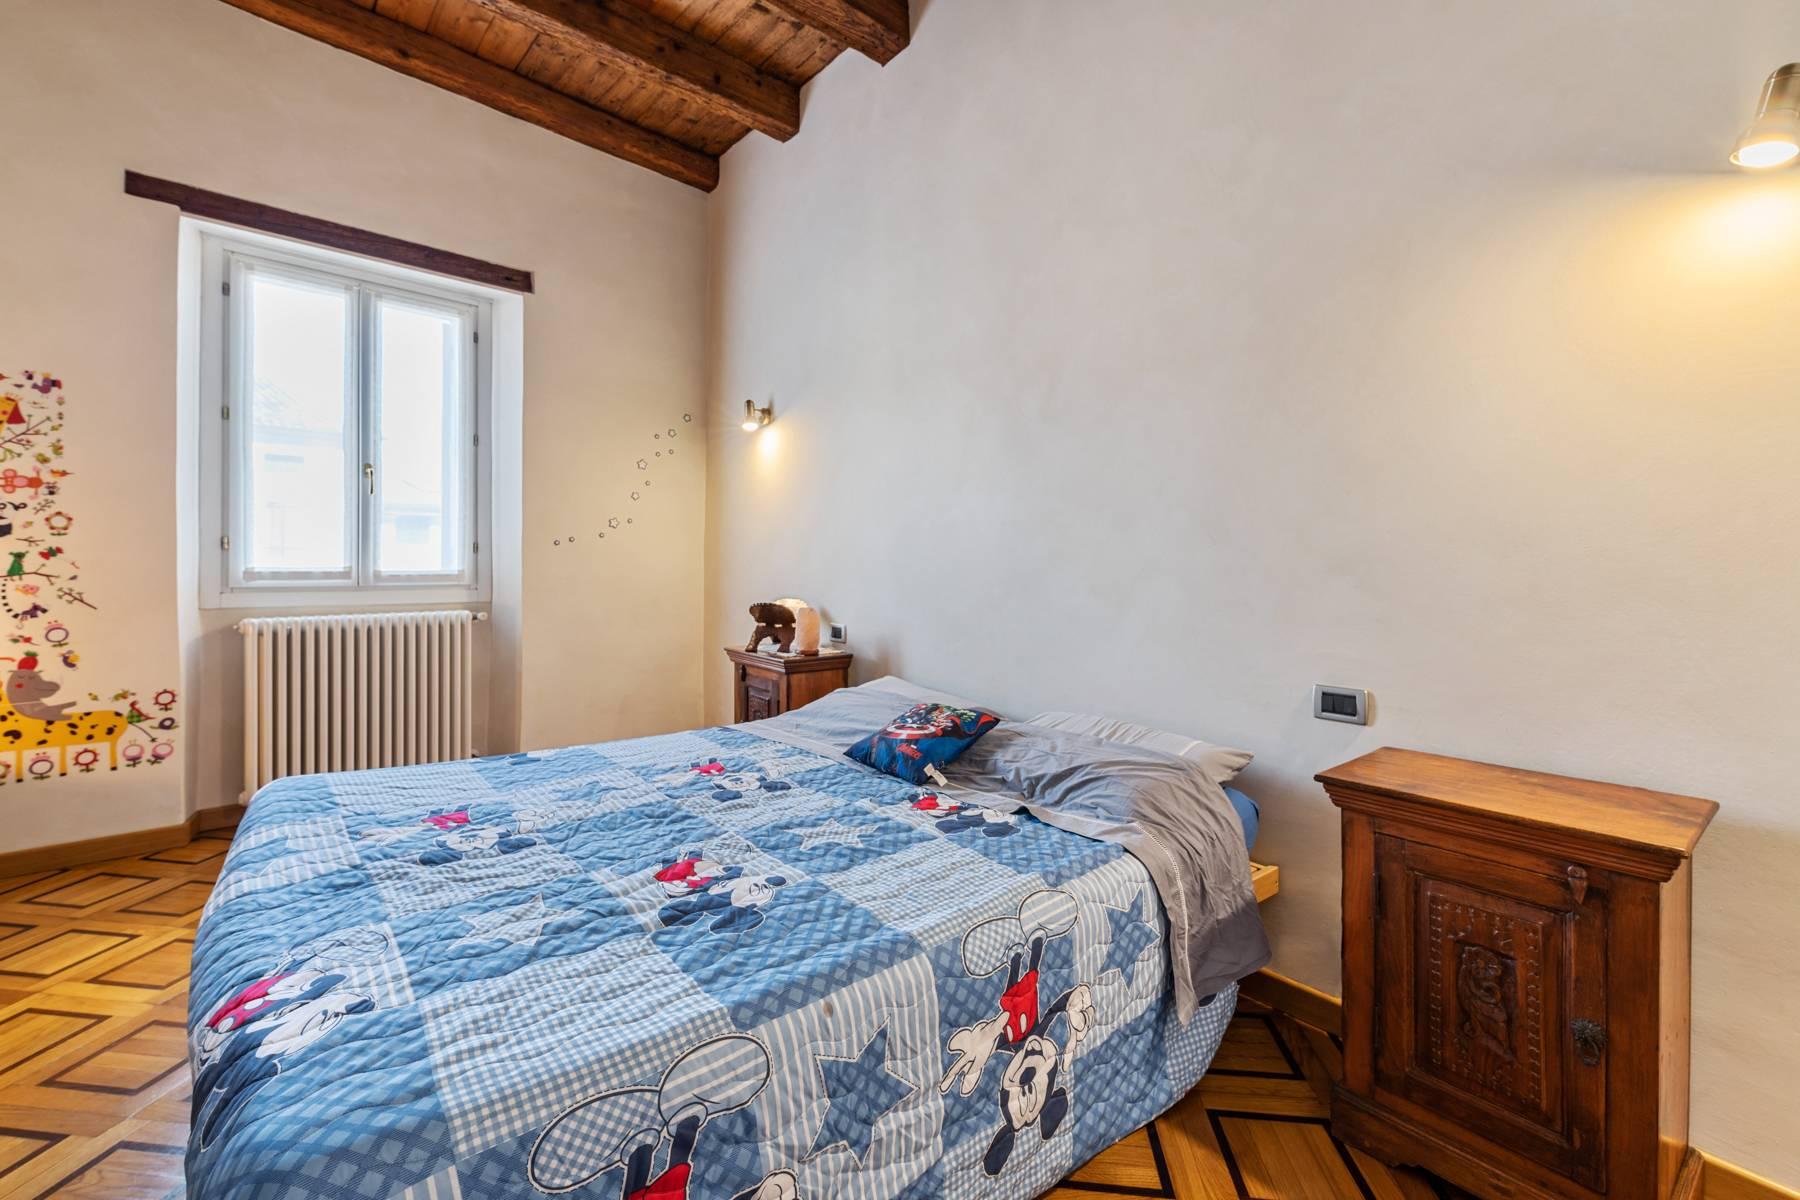 Elegant 15th century building, completely renovated in the historic center of Serravalle - 16